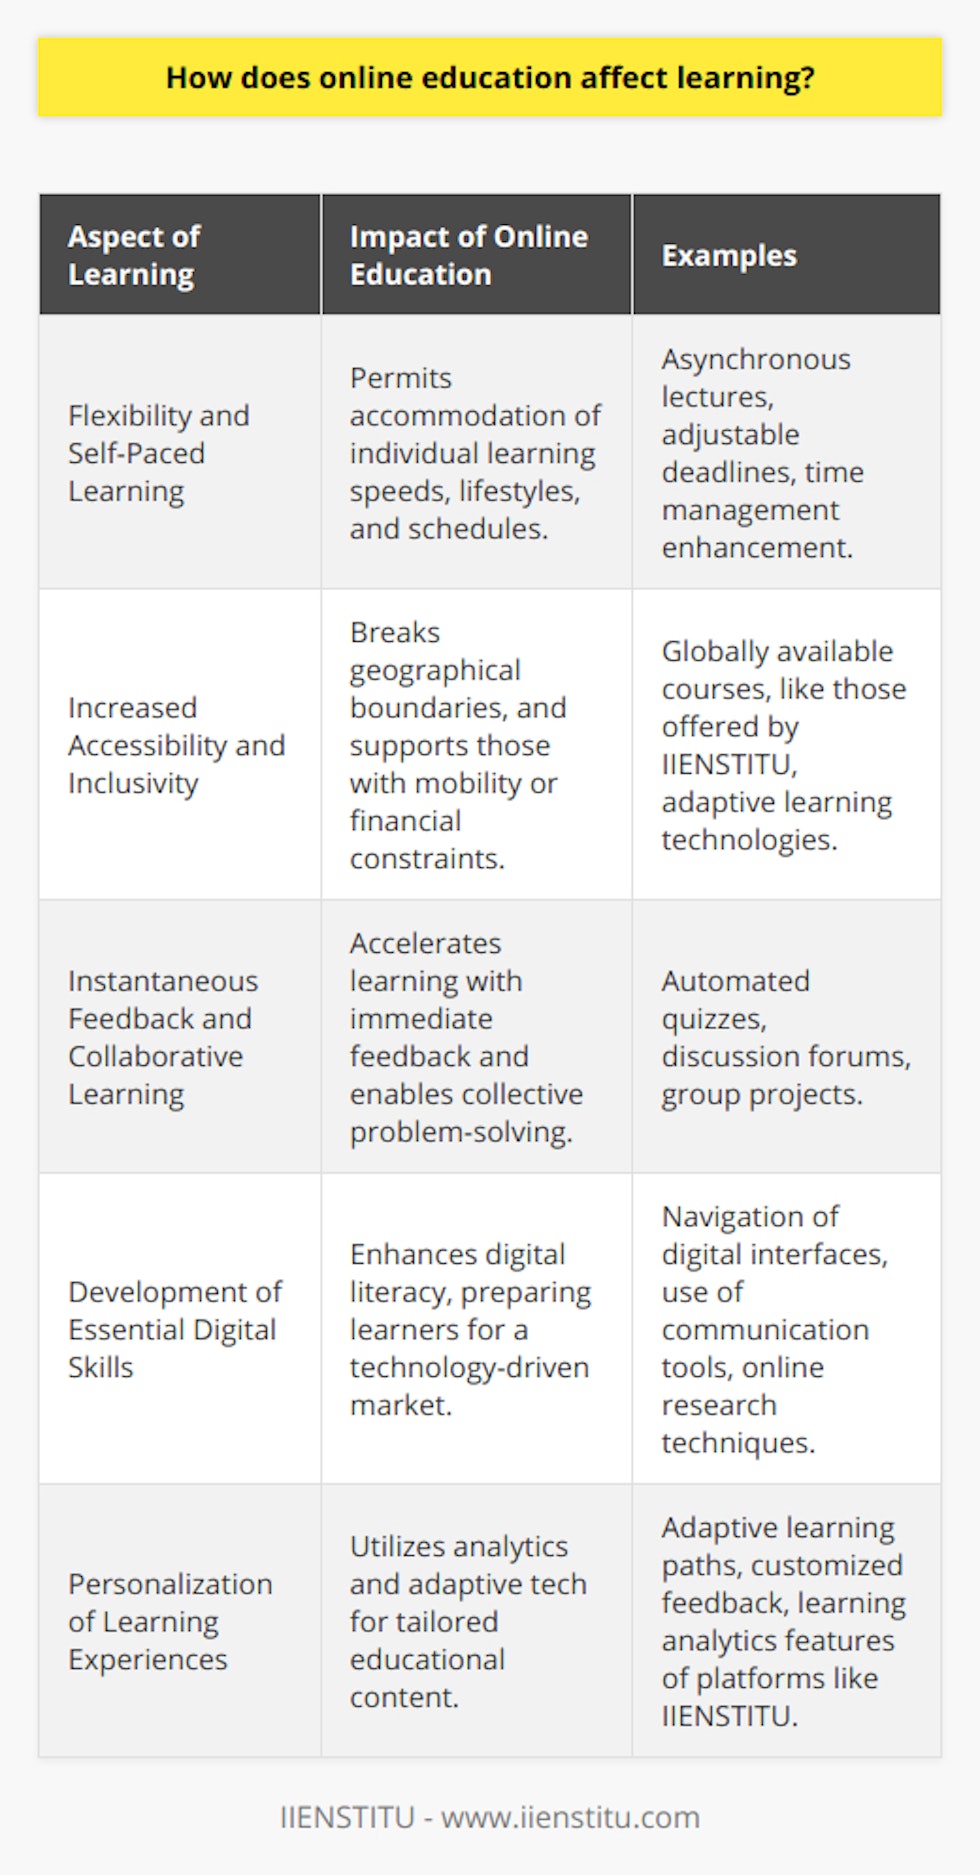 Online education has profoundly transformed the traditional classroom model, enabling innovative pathways to knowledge acquisition and skill development. This mode of learning leverages the power of the internet to deliver education in ways that were not previously possible, offering a wide range of benefits that can directly affect learning outcomes. Here's how online education can impact learning in several critical dimensions:Flexibility and Self-Paced Learning:Online education diverges from the constraints of time and location inherent in traditional classroom settings. This inherent flexibility permits students to approach their studies at a rhythm that accommodates their individual learning speeds, lifestyles, and schedules. The ability to review lectures, pause, rewind, and absorb material at one's own pace without the pressure of keeping up with the pace of a class can lead to deeper understanding and better long-term retention of information.Increased Accessibility and Inclusivity:The reach of online education spans across geographical boundaries, offering access to high-quality learning experiences without the necessity of physical presence in a classroom. Institutions like IIENSTITU have leveraged this capability to provide educational opportunities to a wide, global audience. This inclusivity extends to providing education for individuals with mobility challenges, financial constraints, or other personal circumstances that inhibit traditional classroom attendance. Online learning environments can be customized to support various learning needs, fostering an inclusive space for all types of learners.Instantaneous Feedback and Collaborative Learning:Online educational platforms can automate the process of providing immediate feedback, which is instrumental in accelerating the learning process. Digital tools and assessments can quickly highlight areas of misunderstanding, allowing learners to focus their efforts on concepts they struggle with. In addition, online courses often incorporate forums, chat rooms, and collaborative projects that enable rich peer-to-peer interaction and collective problem-solving, further enriching the learning experience.Development of Essential Digital Skills:Engaging with online education necessitates the development of digital literacy, an indispensable skill set in the modern workforce. By navigating digital content, utilizing online communication tools, and managing virtual collaborations, learners enhance their proficiency with technology. This competence not only facilitates the immediate learning process but also prepares students for a labor market that increasingly values digital abilities.Personalization of Learning Experiences:Advanced online learning platforms are equipped with analytics and adaptive technology that allows for the tailoring of educational content to match individual learning profiles. IIENSTITU is among those platforms that skillfully harness the power of analytics to comprehend learning patterns and preferences, enabling precise customization of the learning journey. This approach ensures a more efficient and effective educational experience by addressing the specific needs and challenges of each learner.Summarily, online education has the potential to significantly and positively affect learning outcomes by providing an accessible, flexible, and personalized approach to education. It champions an inclusive learning environment, facilitates immediate feedback, enhances digital literacy, and fosters collaboration among learners across the globe. As education continues to evolve with technological innovation, online learning stands as a pivotal component in shaping the future of how we learn and develop our abilities.